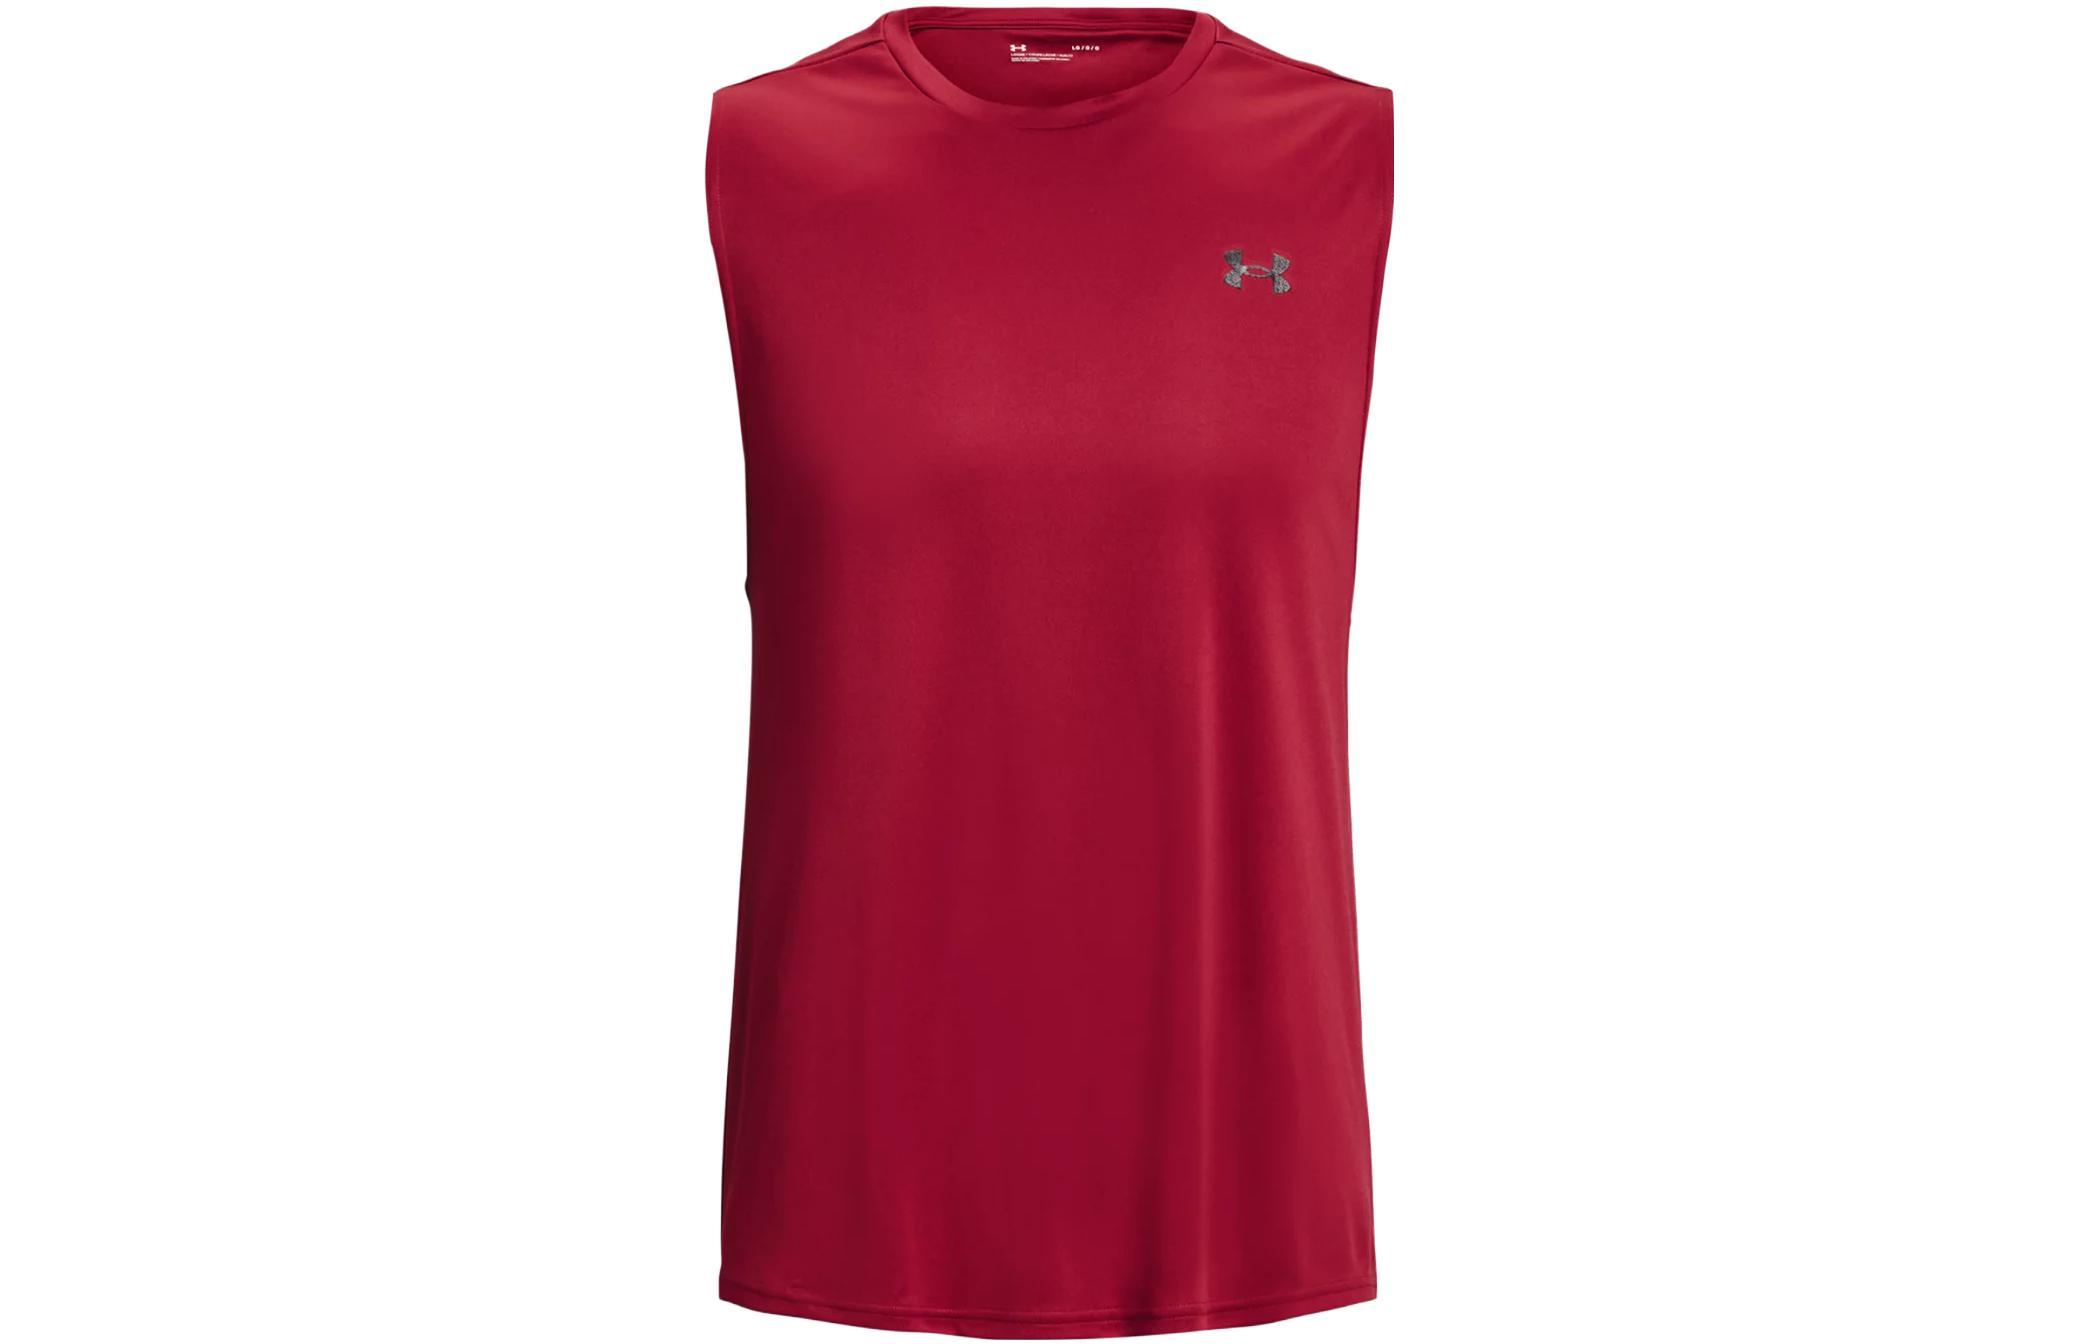 Under Armour Velocity Muscle